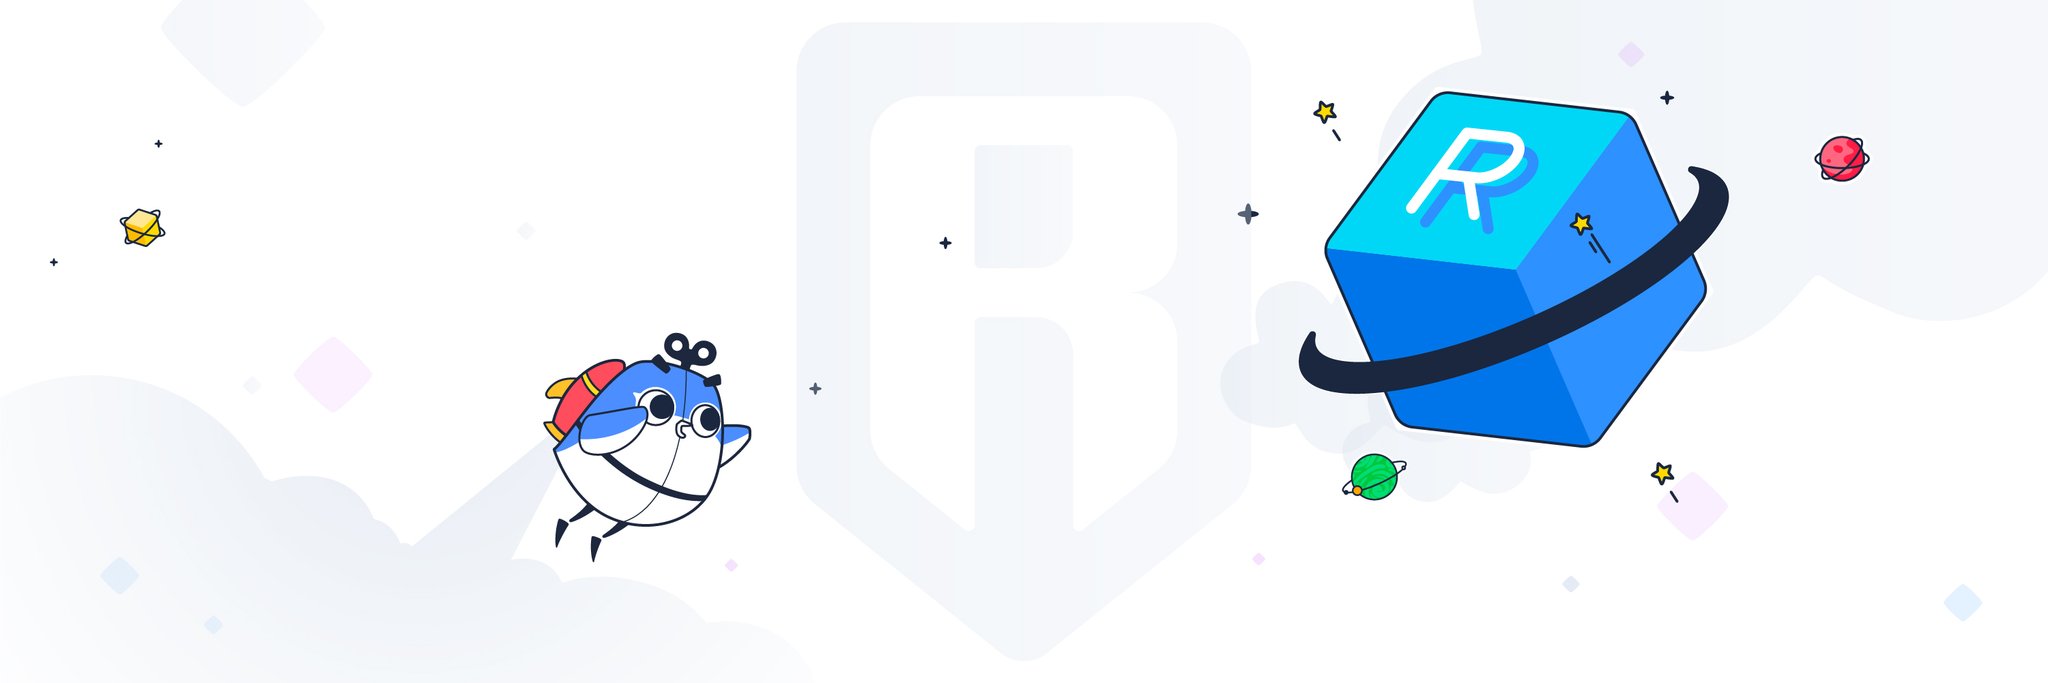 Today, we’re ecstatic to reveal developer documentation for the Ronin Network!  These docs will help aspiring application and tool builders on their quest to build on Ronin. This is a step towards opening up Ronin for more builder activity.  🛠️ : [docs.roninchain.com] [twitter.com] [pbs.twimg.com]